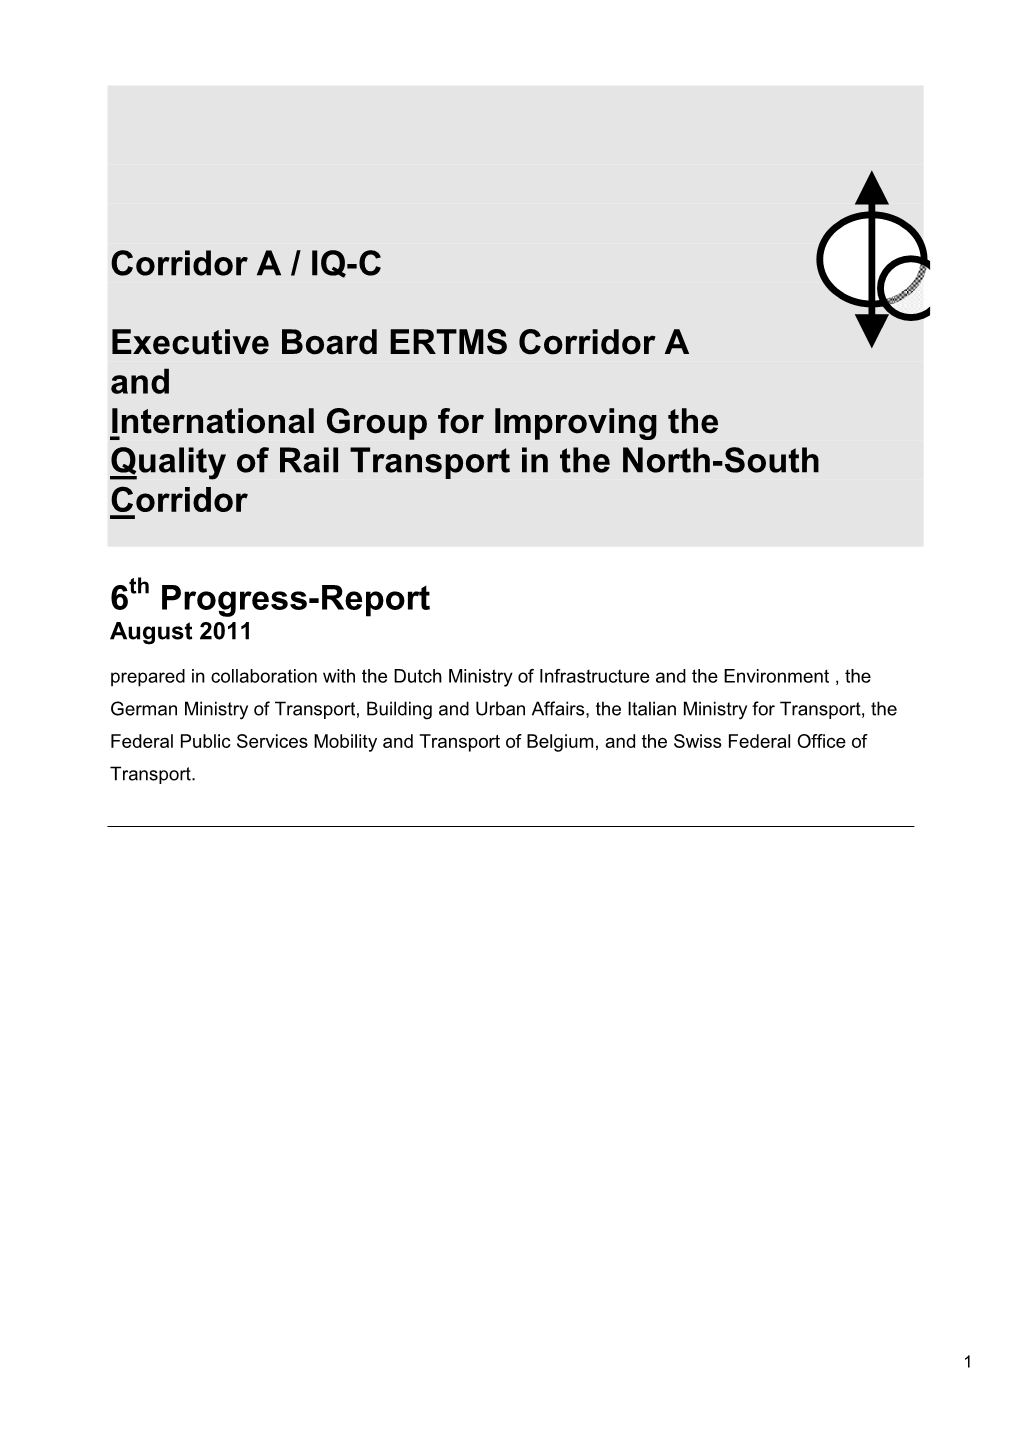 Corridor a / IQ-C Executive Board ERTMS Corridor a and International Group for Improving the Quality of Rail Transport In